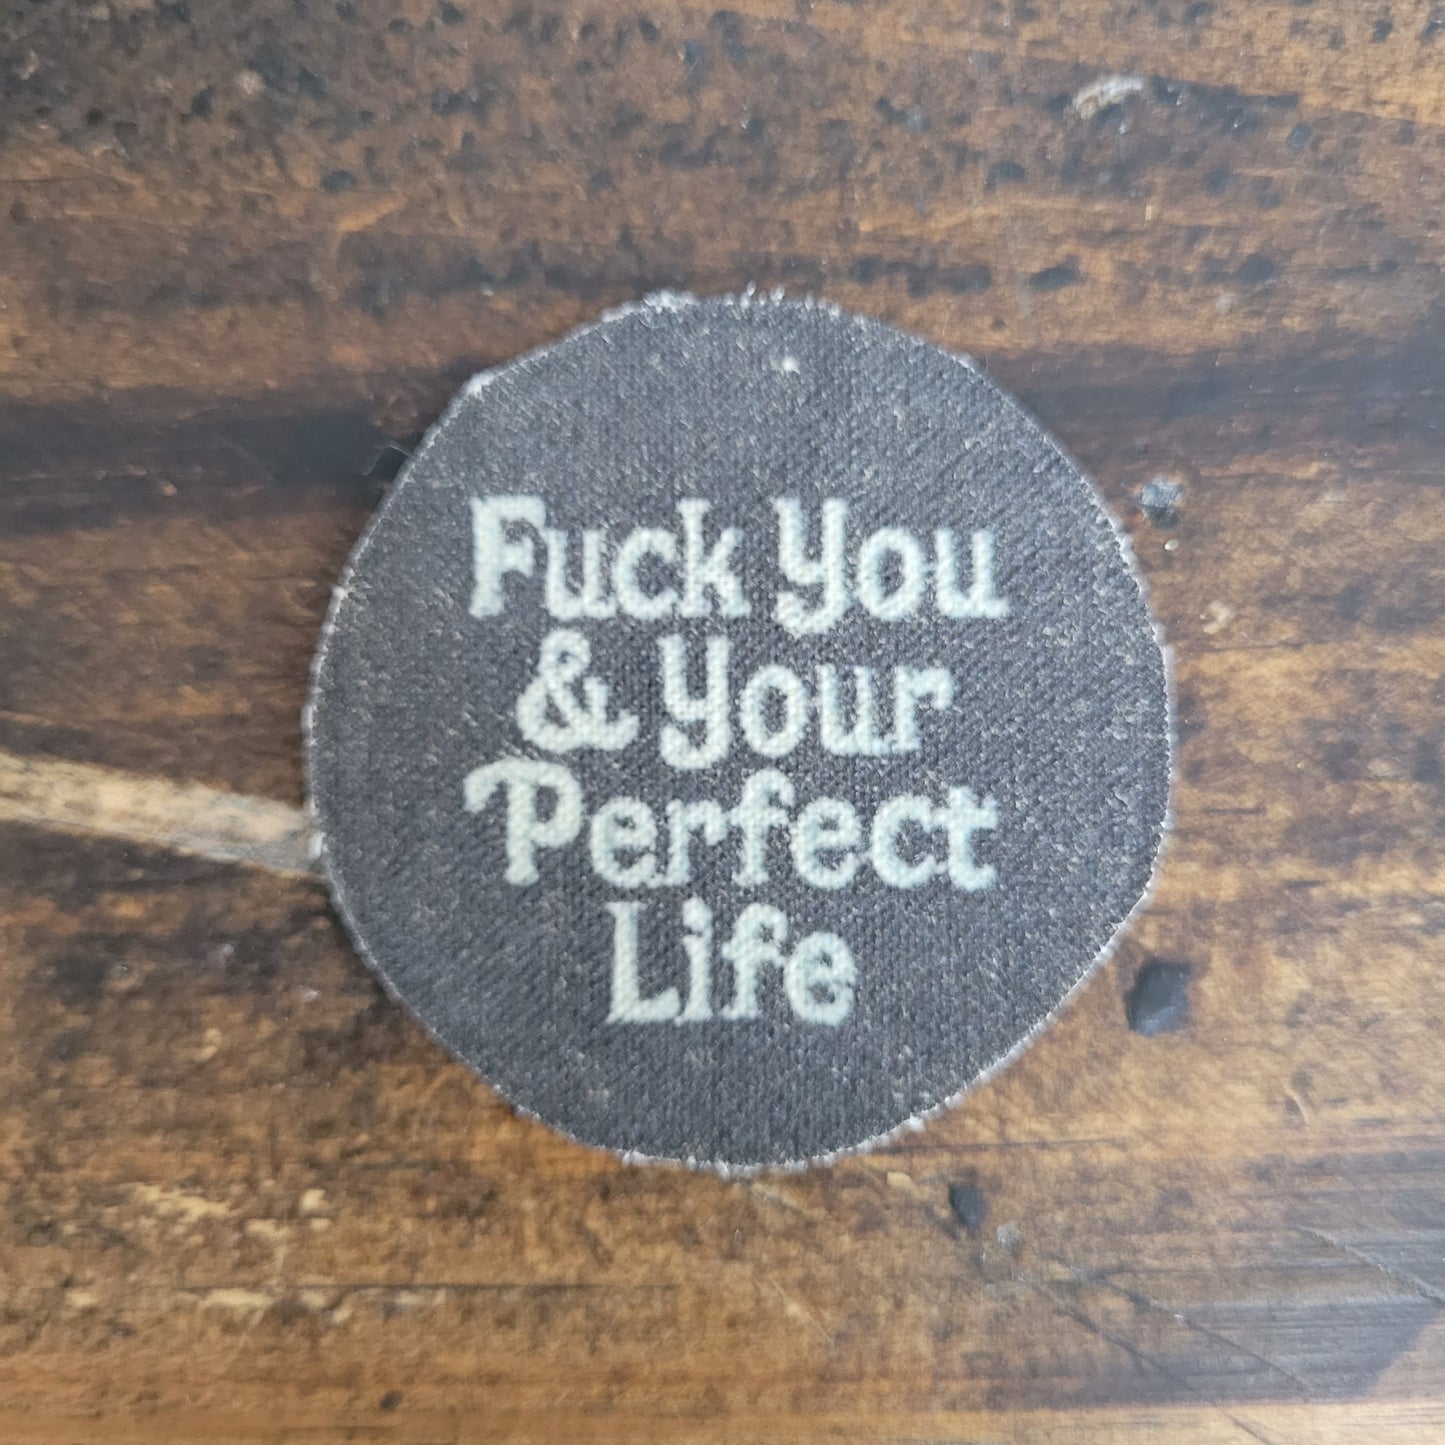 F... you and your perfect life